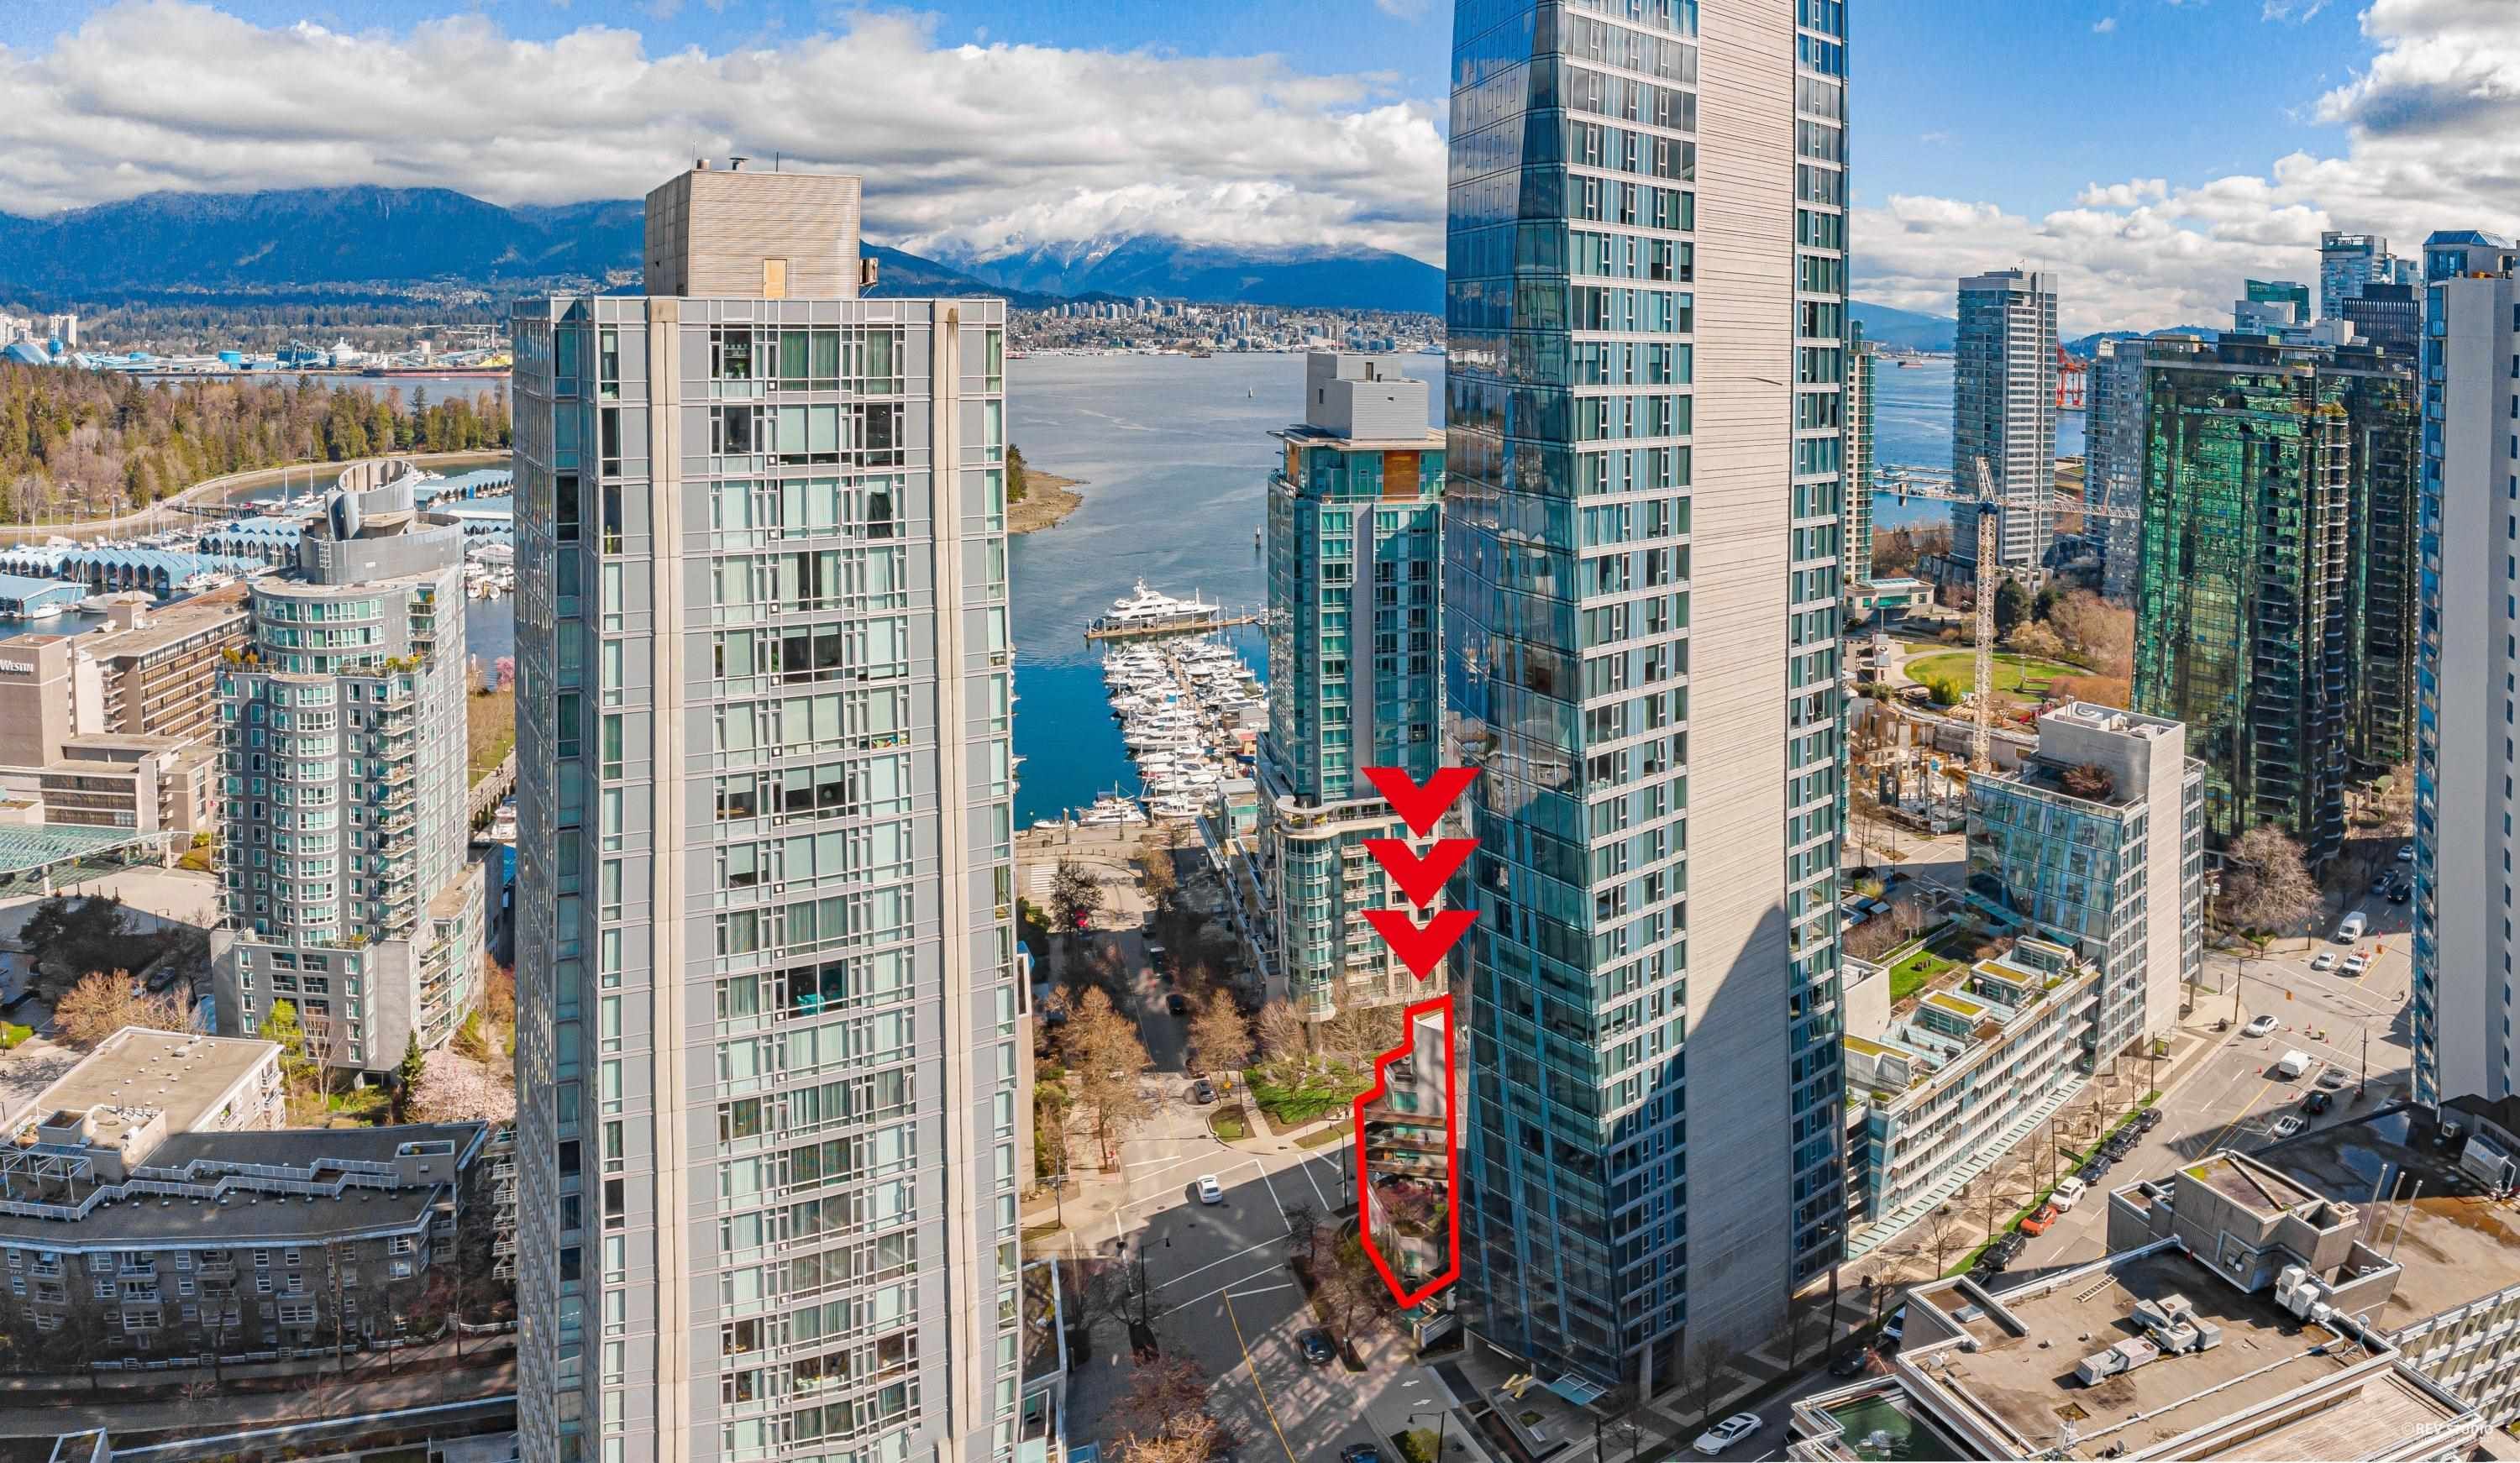 Main Photo: 403 1478 W HASTINGS STREET in Vancouver: Coal Harbour Condo for sale (Vancouver West)  : MLS®# R2771566